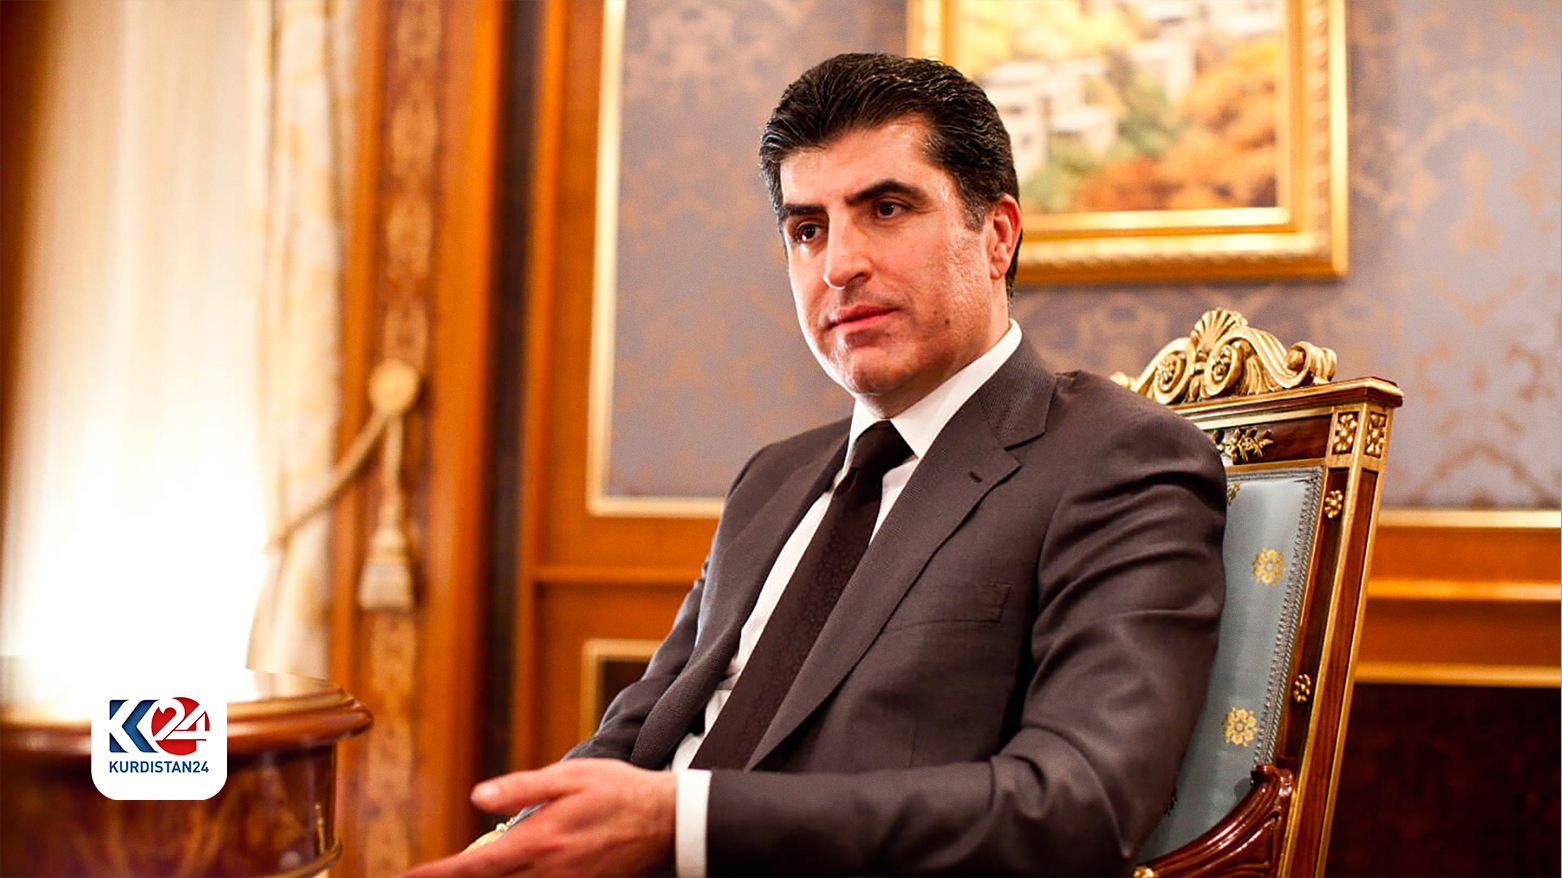 KRG President calls for adherence to journalism laws ethics